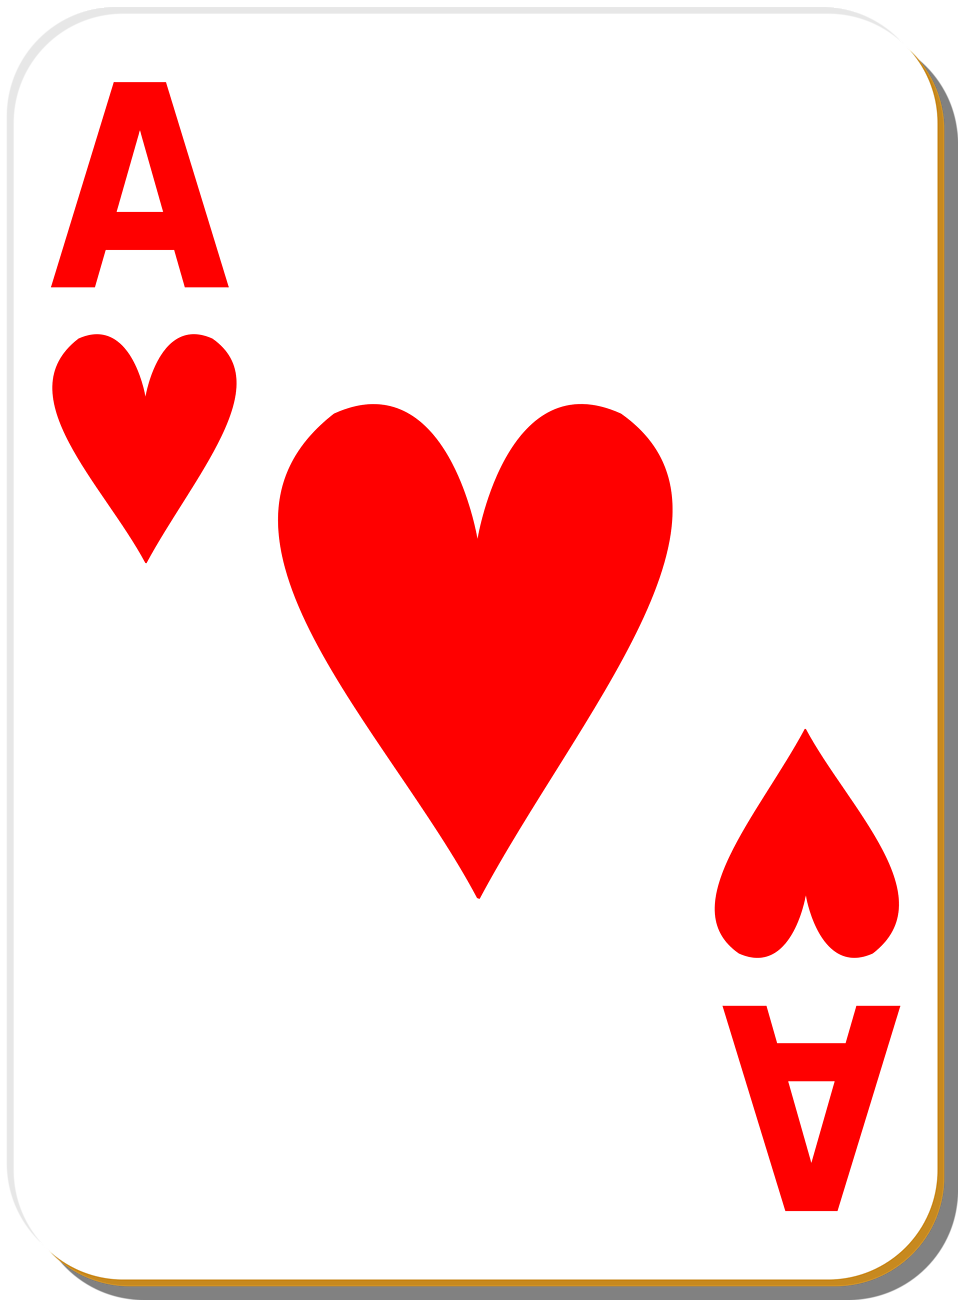 Playing Card | Free Stock Photo | Illustration of an Ace of Hearts ...